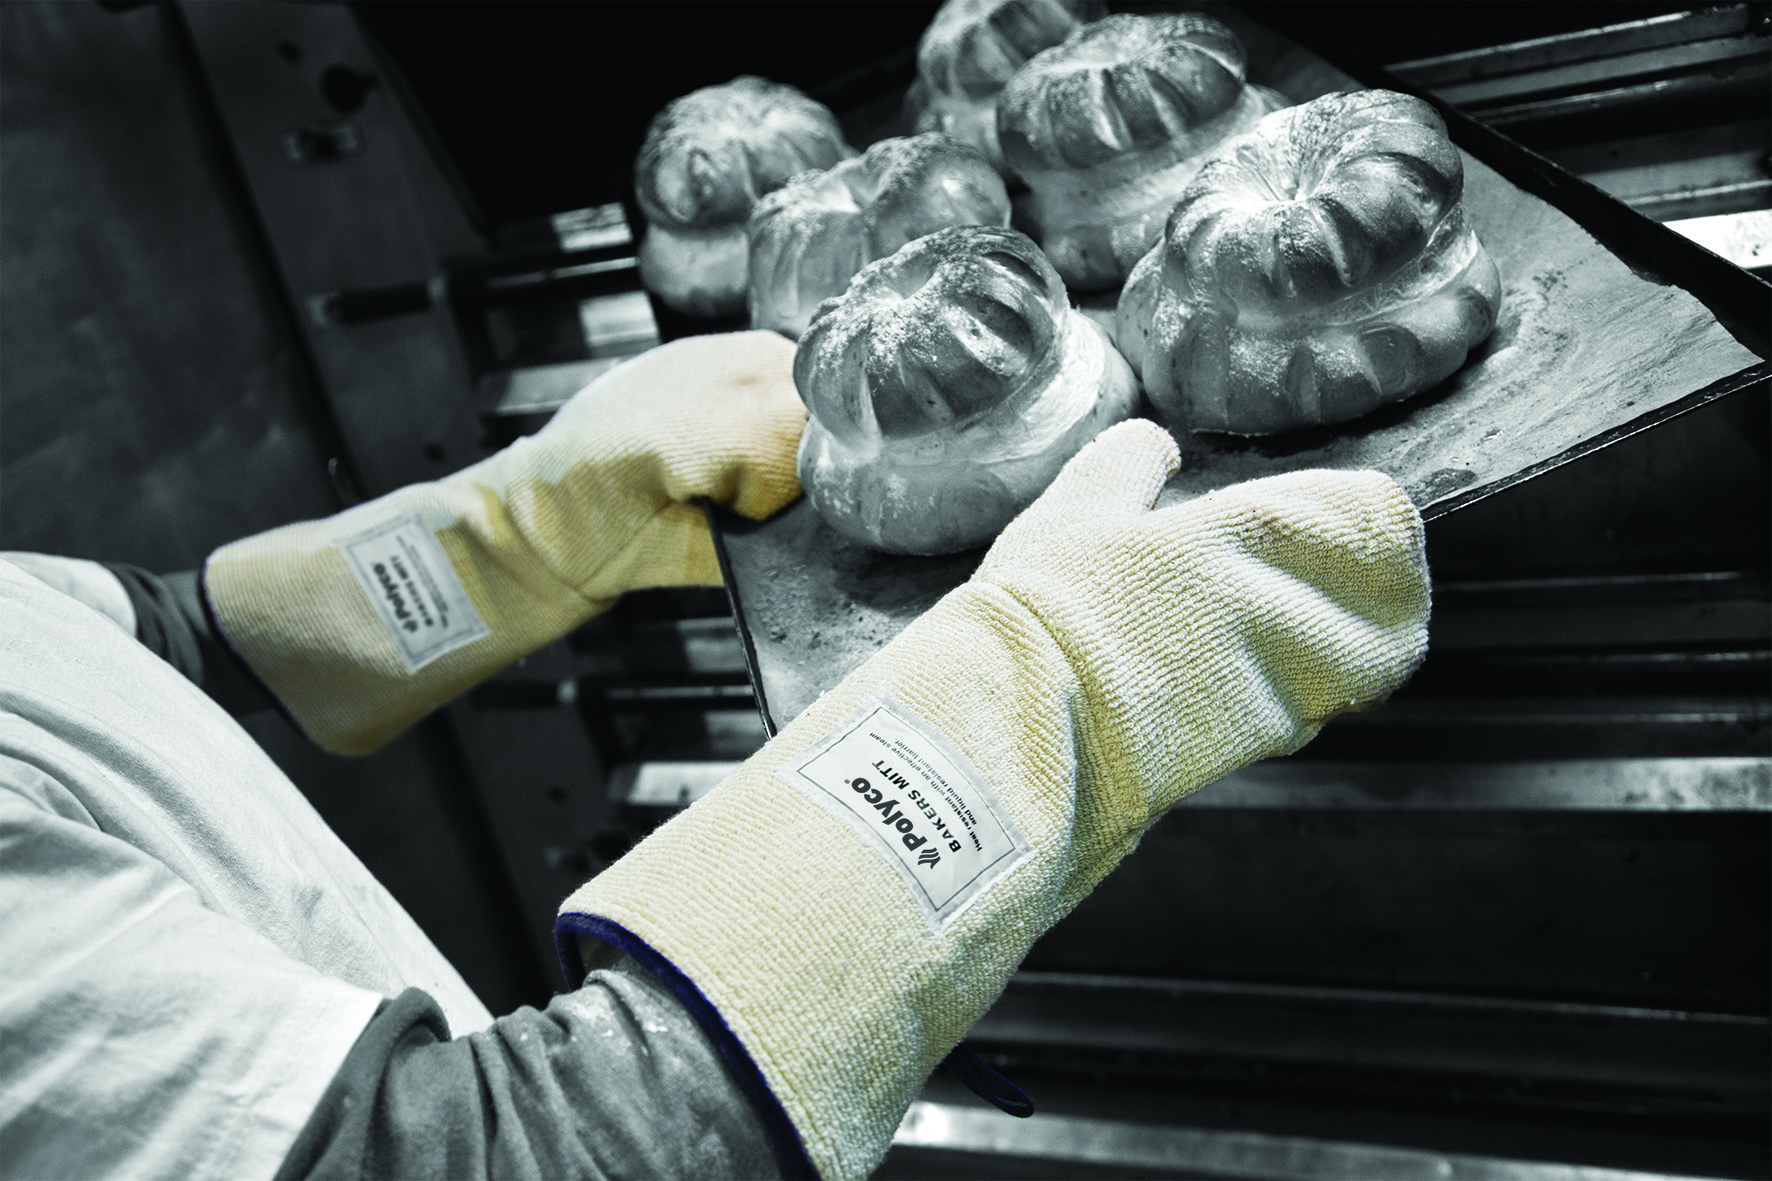 Polyco Bakers Mitts